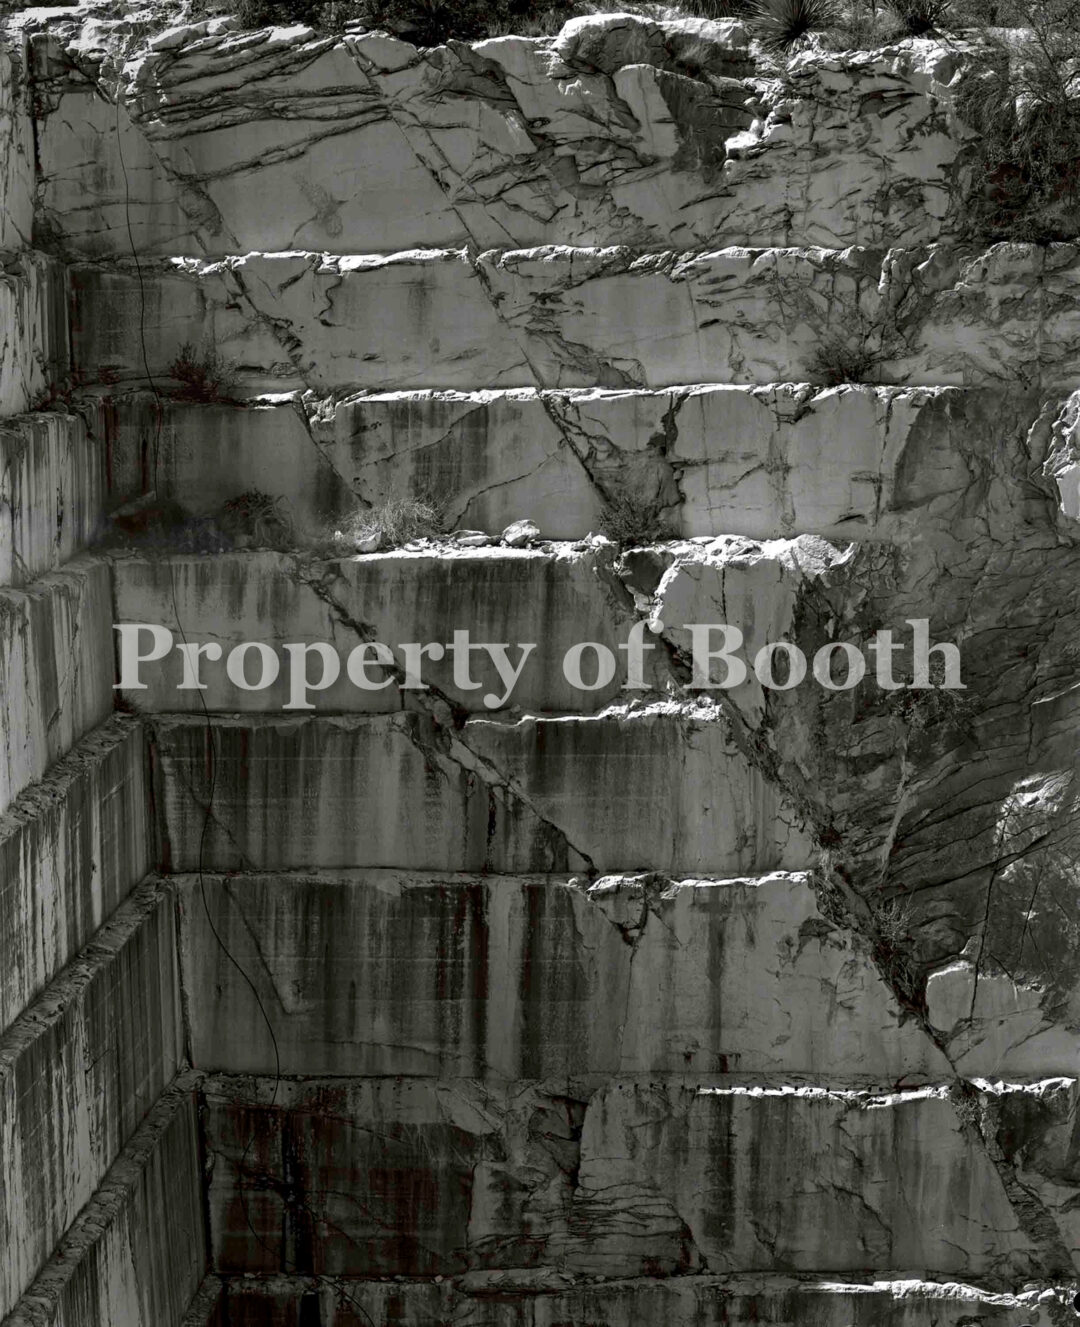 © Jay Dusard, Wall, Abandoned Marble Quarry, Chiricahua Mountains, AZ, 1987, Pigment Print, 38" x 31", PH2018.005.002, The Jay Dusard Collection at the Booth Western Art Museum